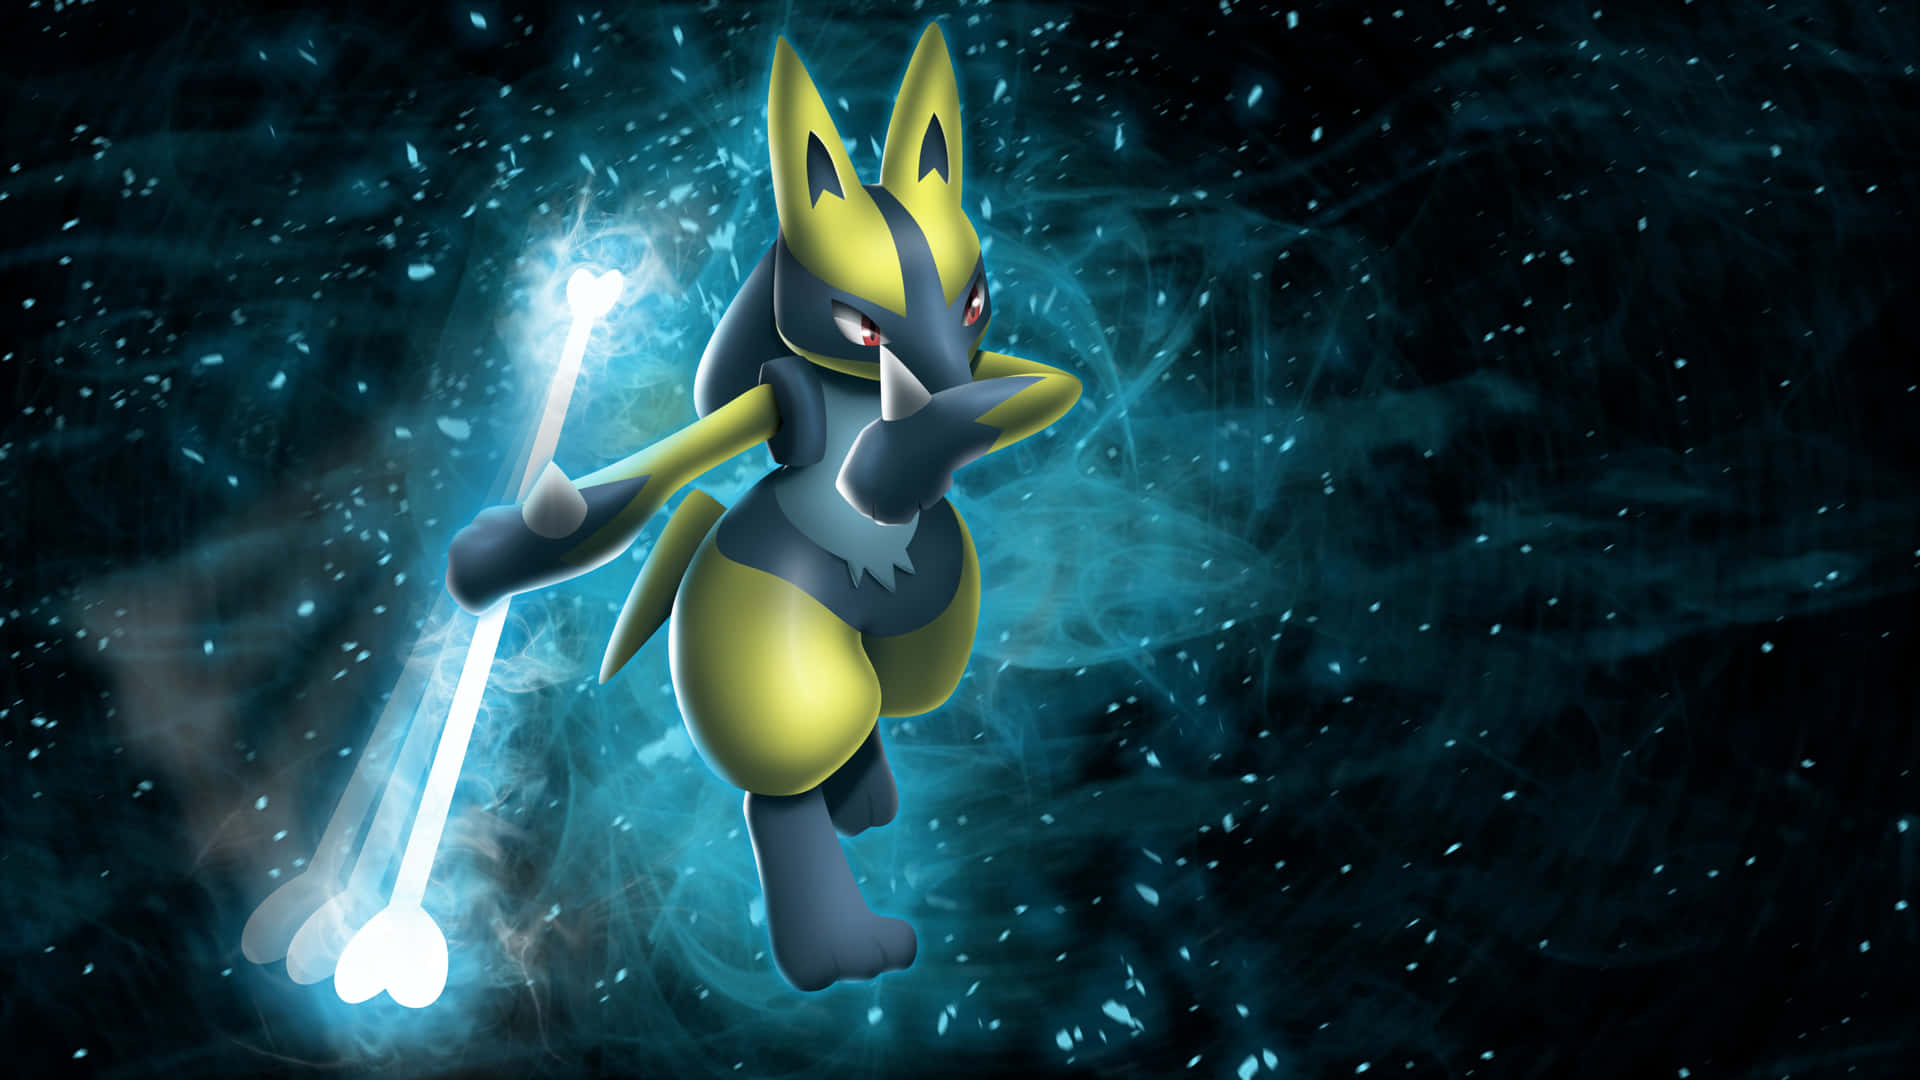 Frigørkraften Af Lucario - Referring To A Possible Wallpaper Featuring Lucario.